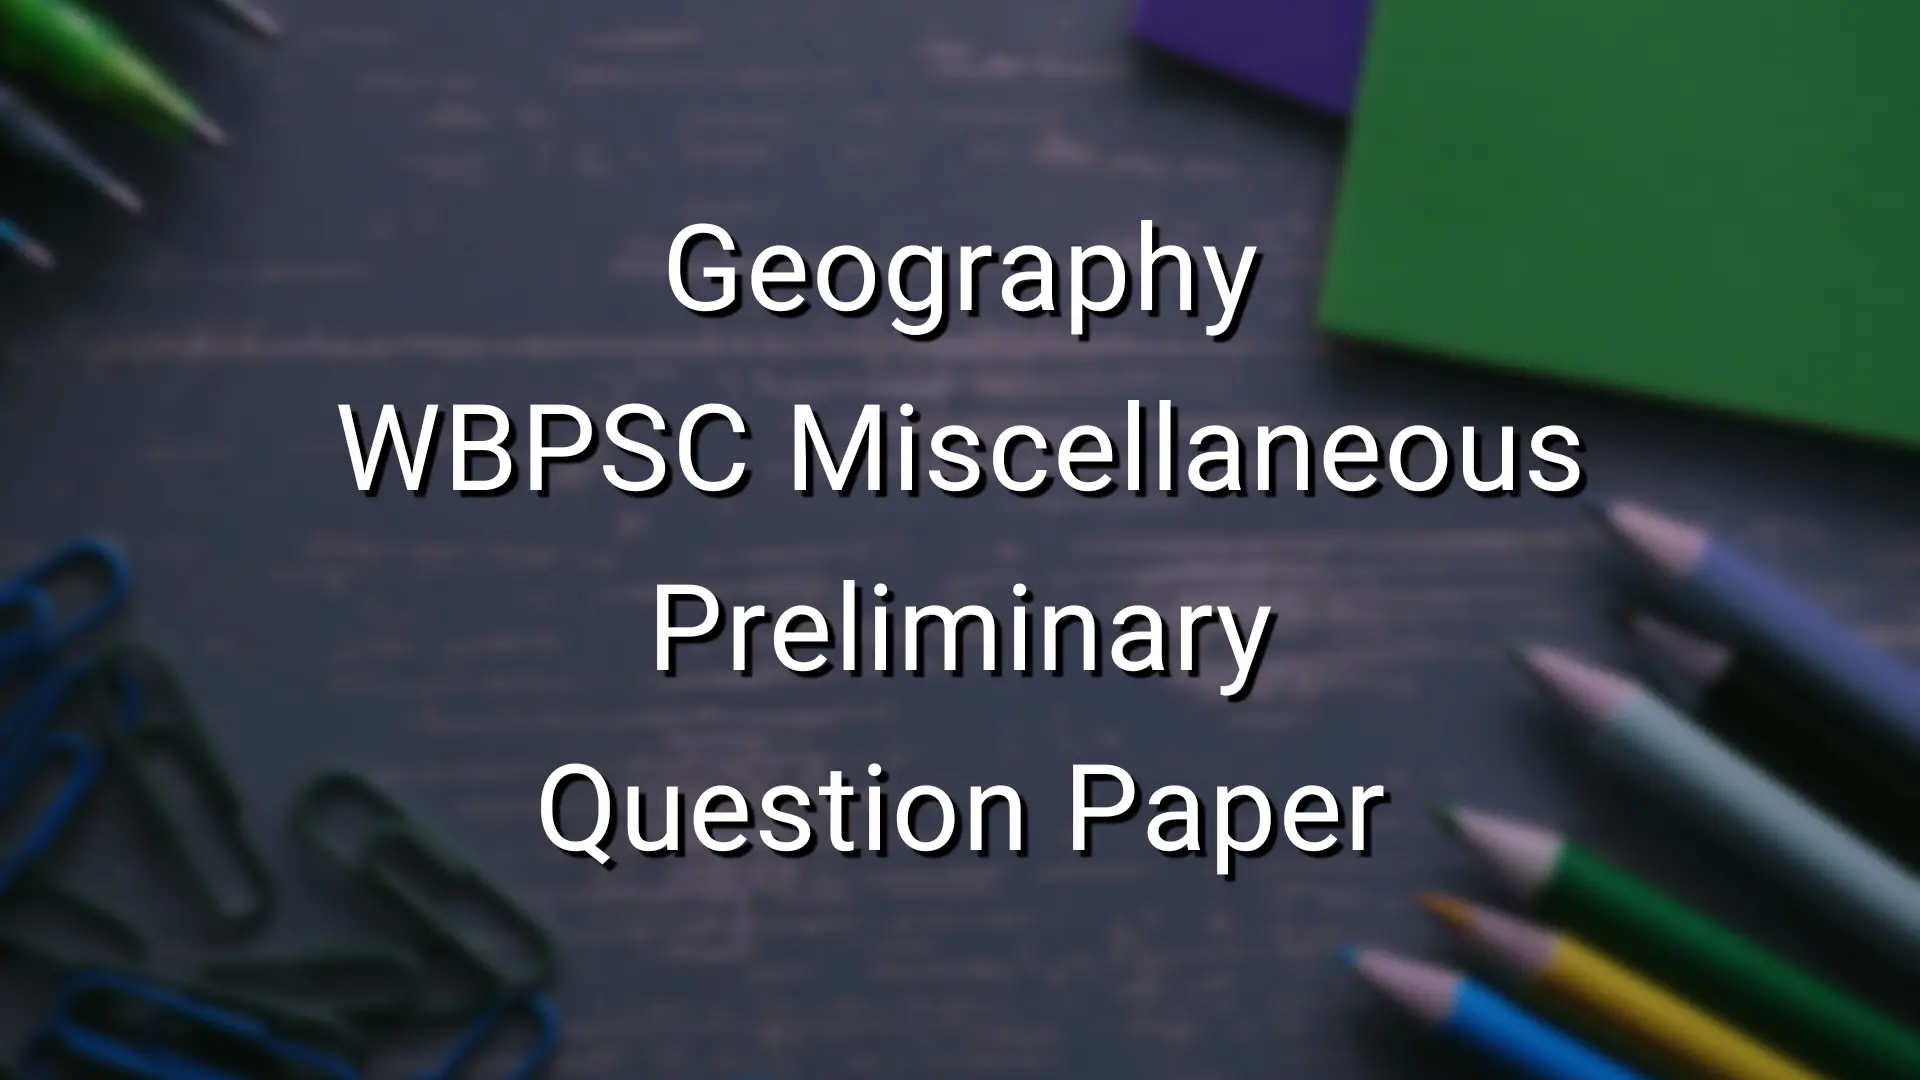 Geography - WBPSC Miscellaneous Preliminary Question Paper